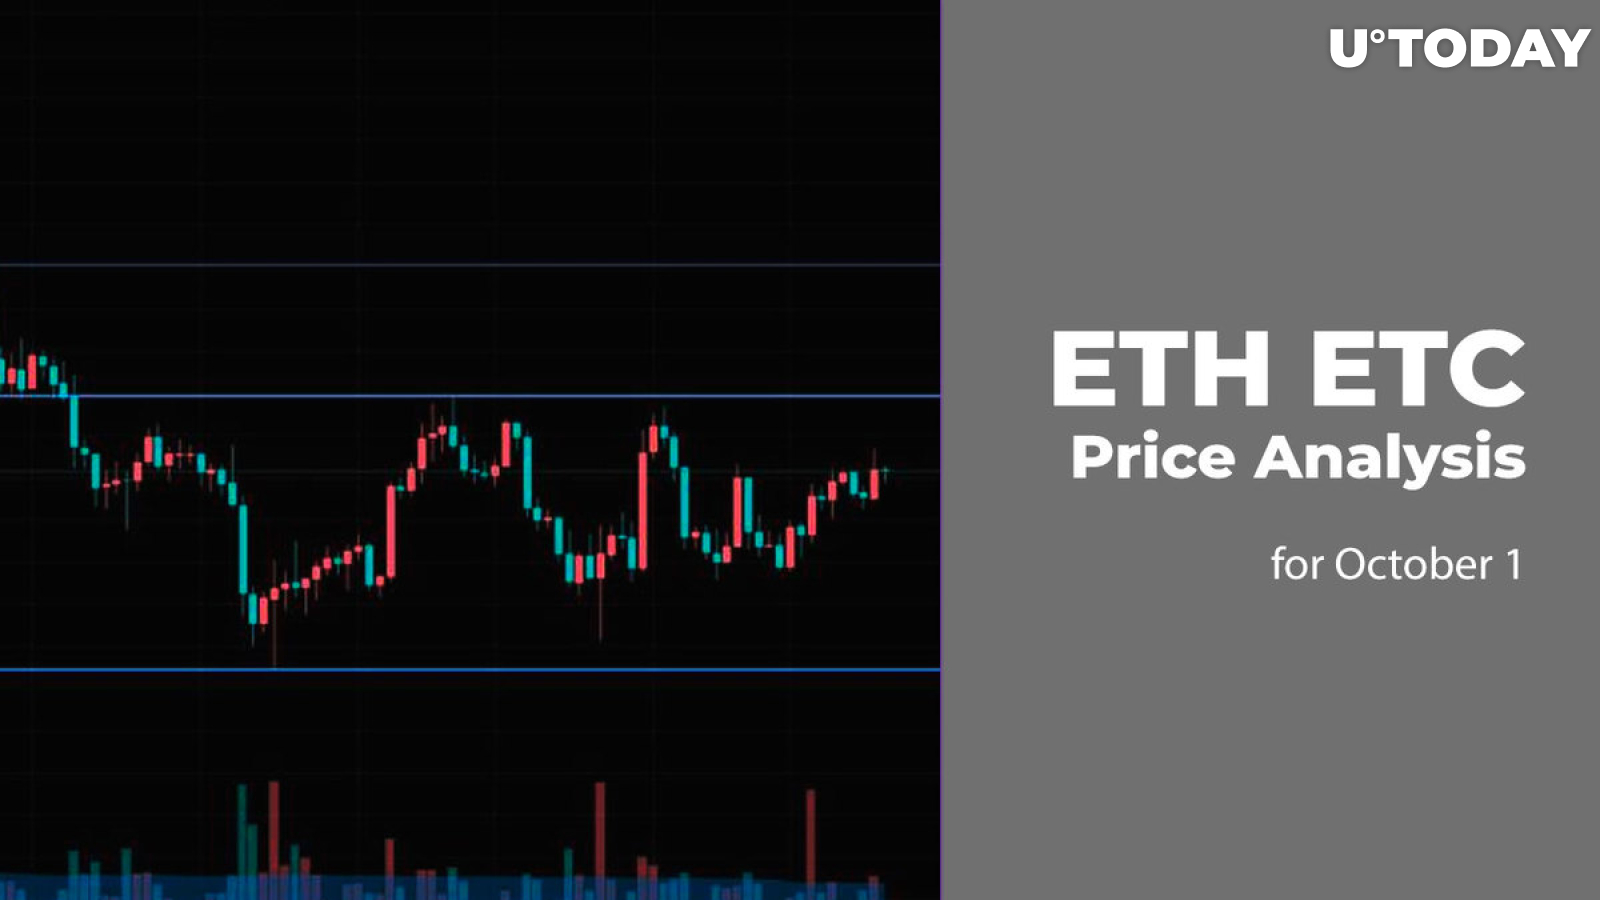 ETH and ETC Price Analysis for October 1